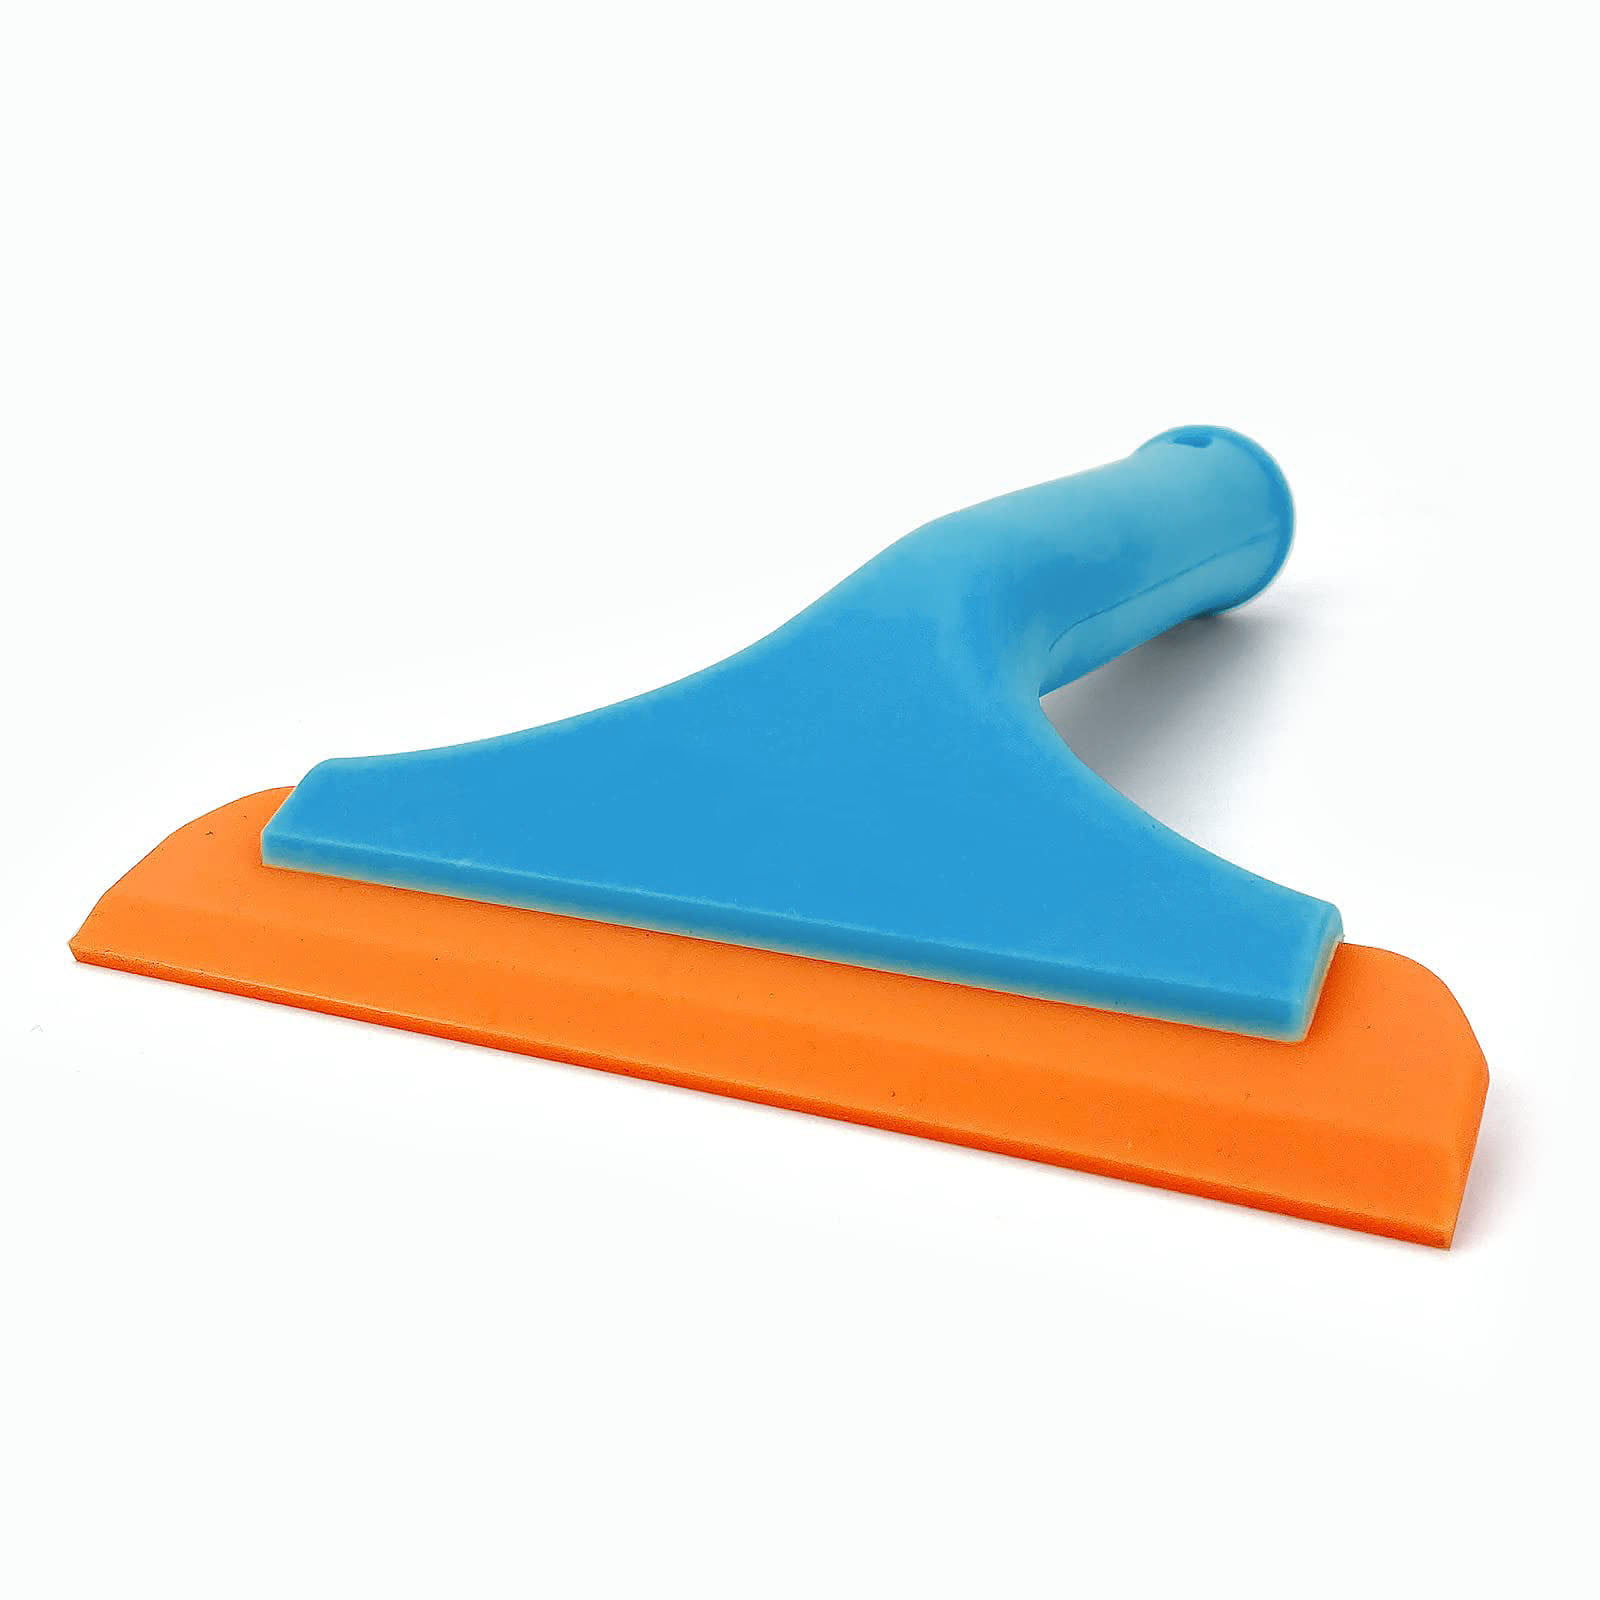  Silicone Squeegee, PP Car Squeegee for Drying, Water Blade for  Cleaning, Water Squeegee Blade Car Wash Squeegee for Shower, Kitchen,  Window : Automotive